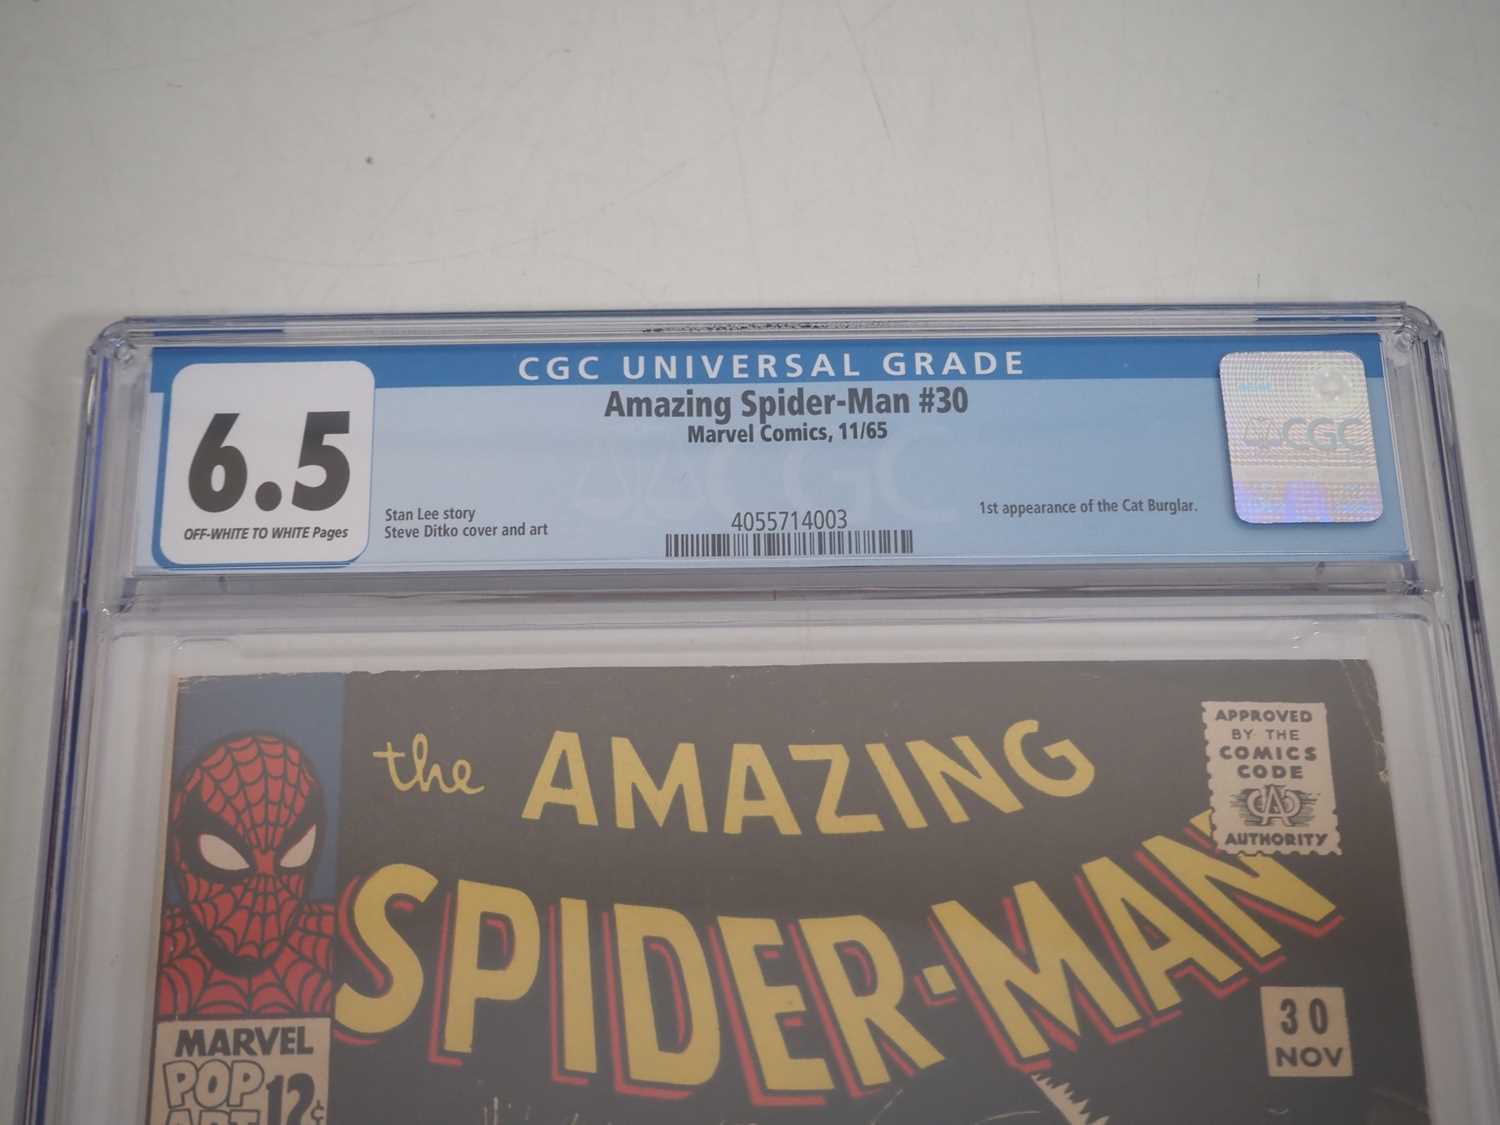 AMAZING SPIDER-MAN #30 (1965 - MARVEL) - GRADED 6.5 (FN+) by CGC - Includes the first appearance - Image 3 of 4